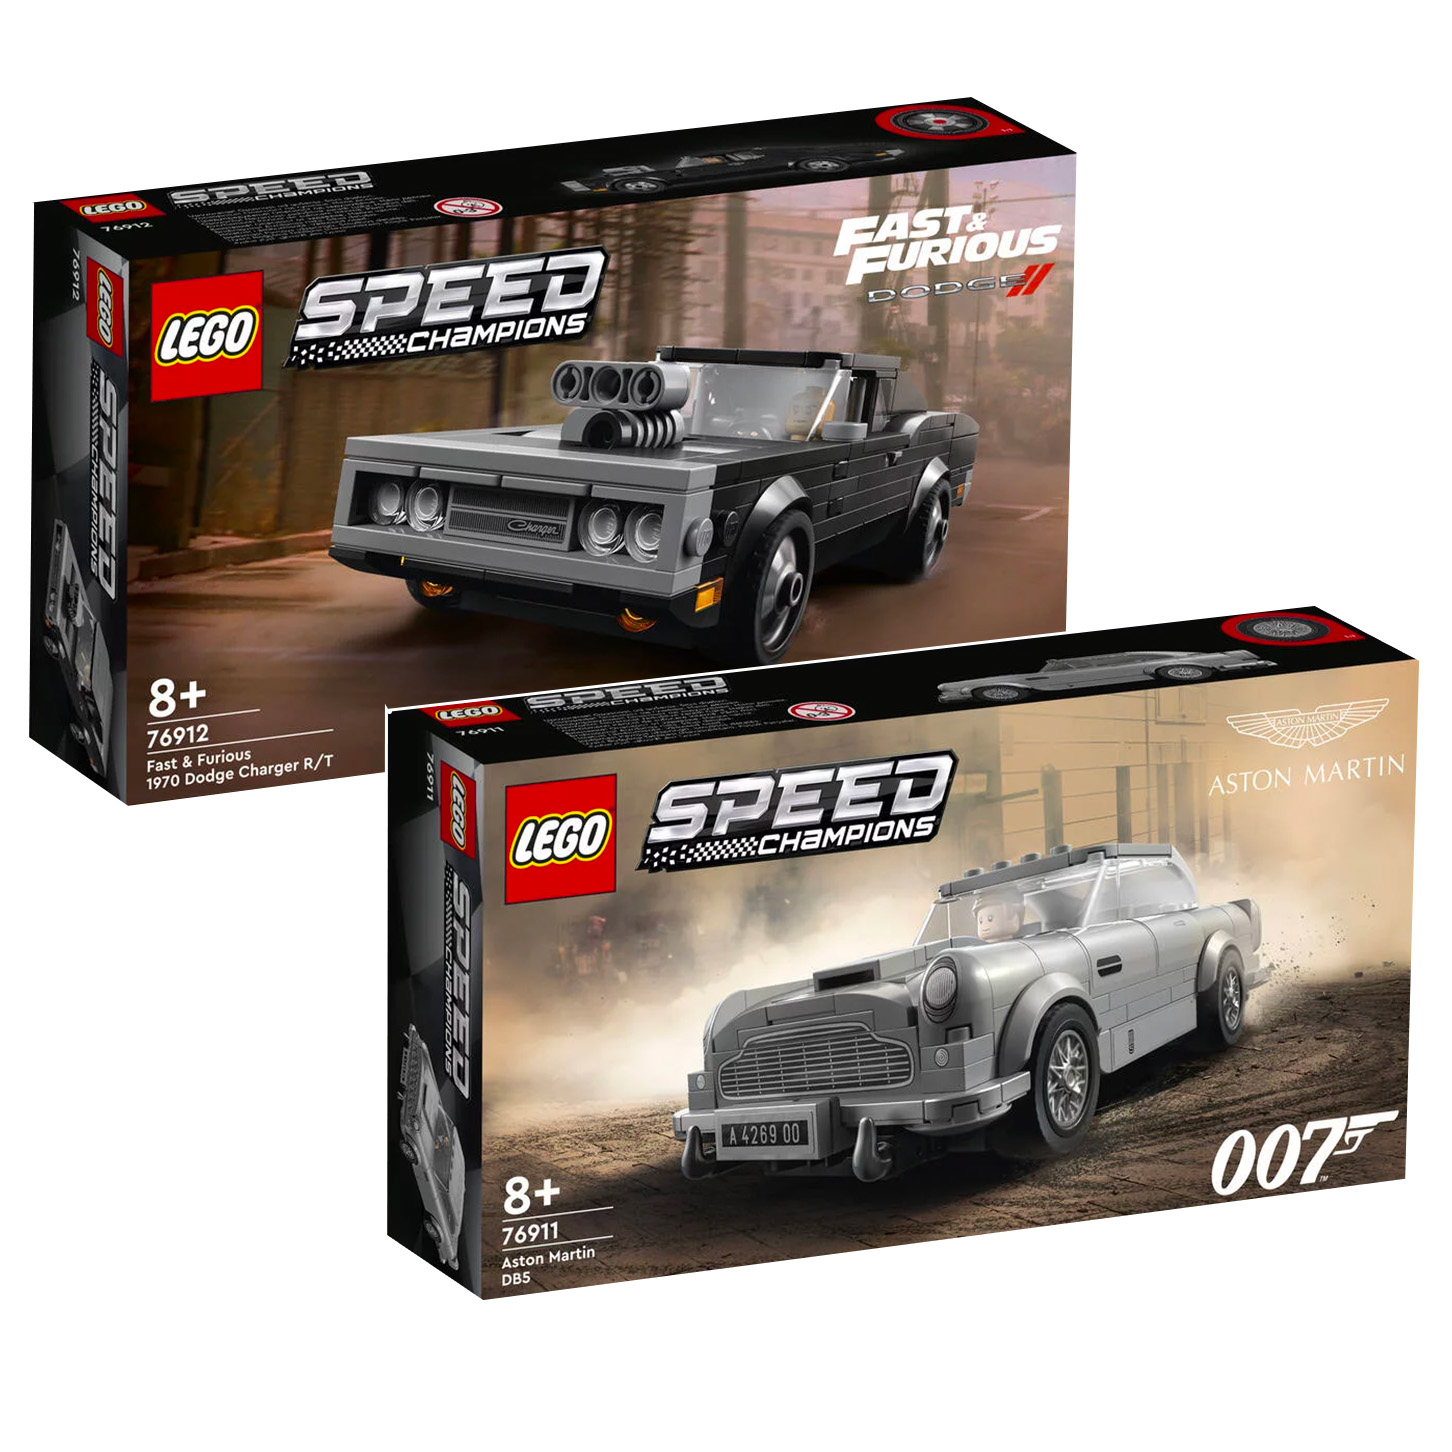 New LEGO Speed ​​Champions 76911 Aston Martin DB5 and 76912 Fast & Furious 1970 Dodge Charger R/T sets are online in the Shop